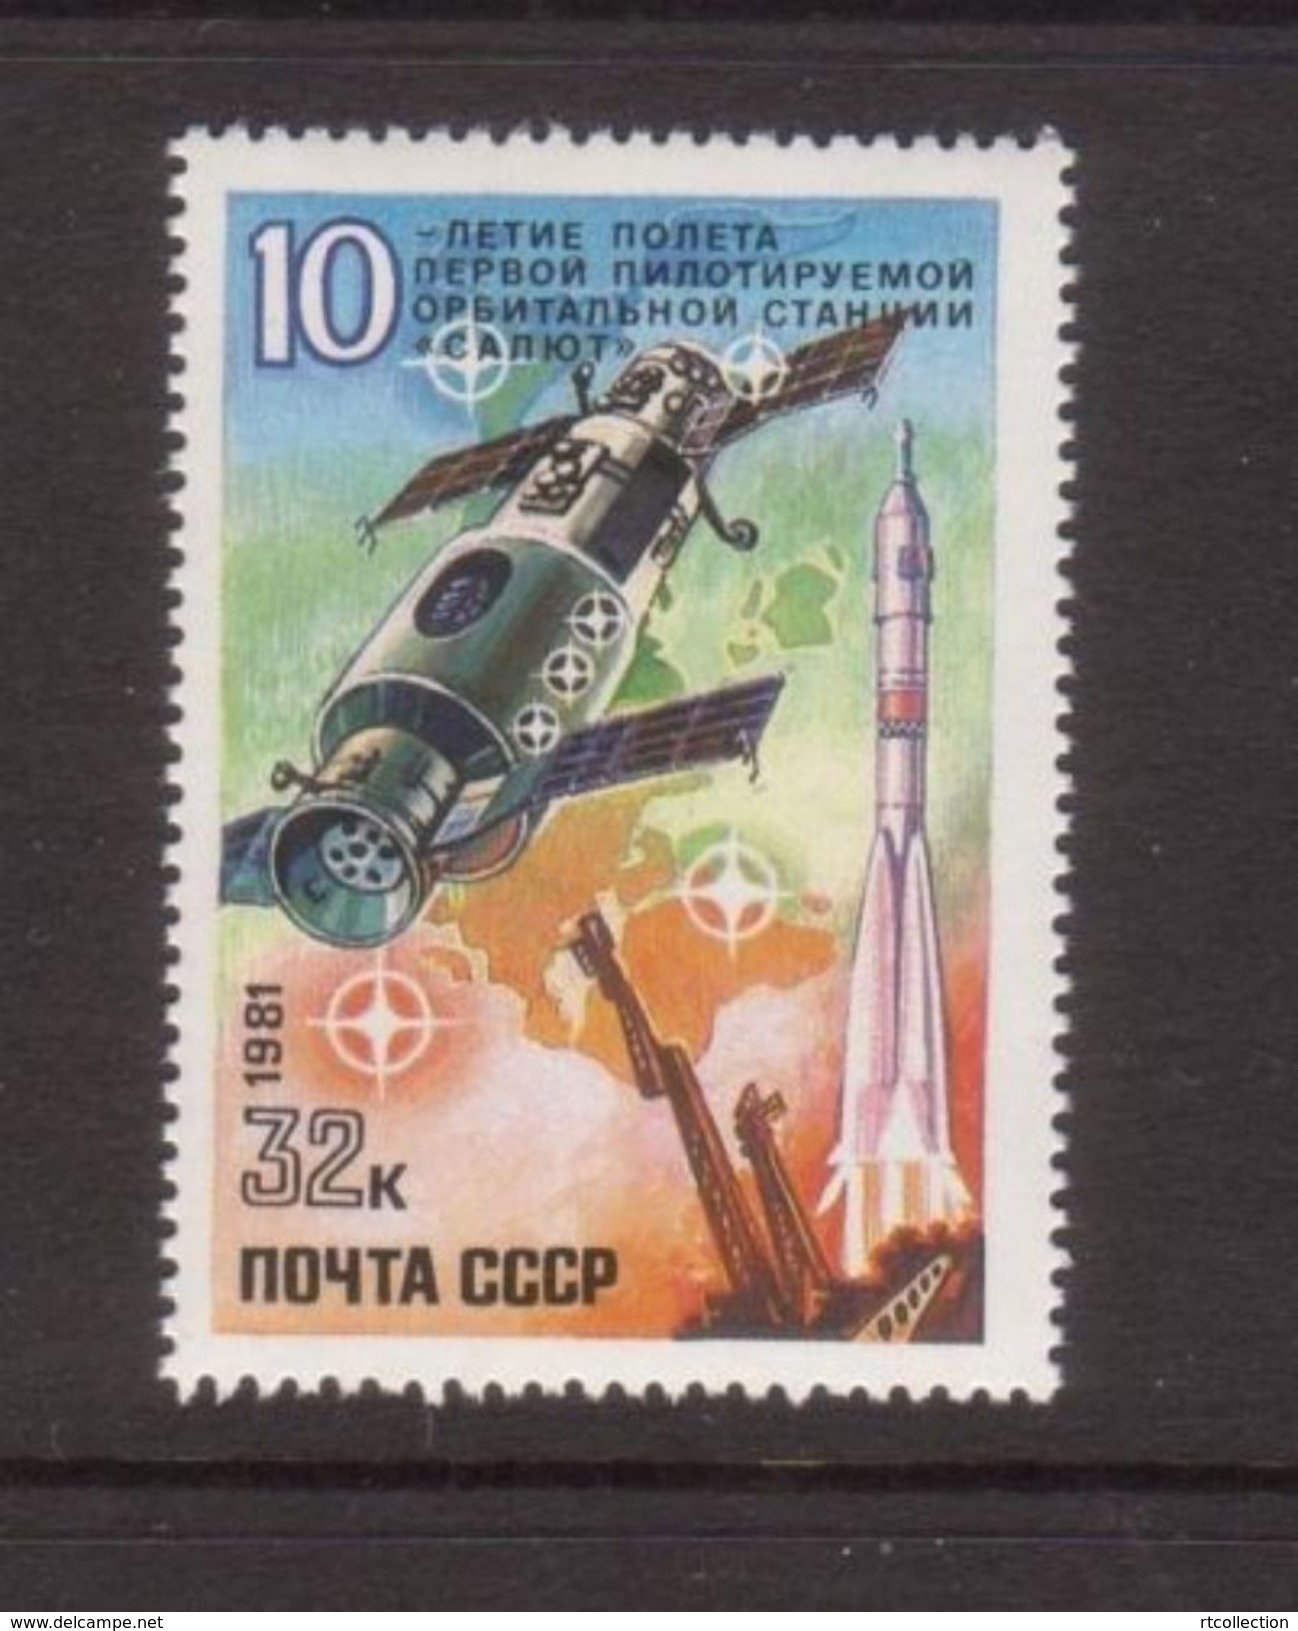 USSR Russia 1981 First Manned Space Sation 10th Anniv Salyut Orbital Spaceflight Explore Sciences Stamp Mi 5060 SG5115 - Collections